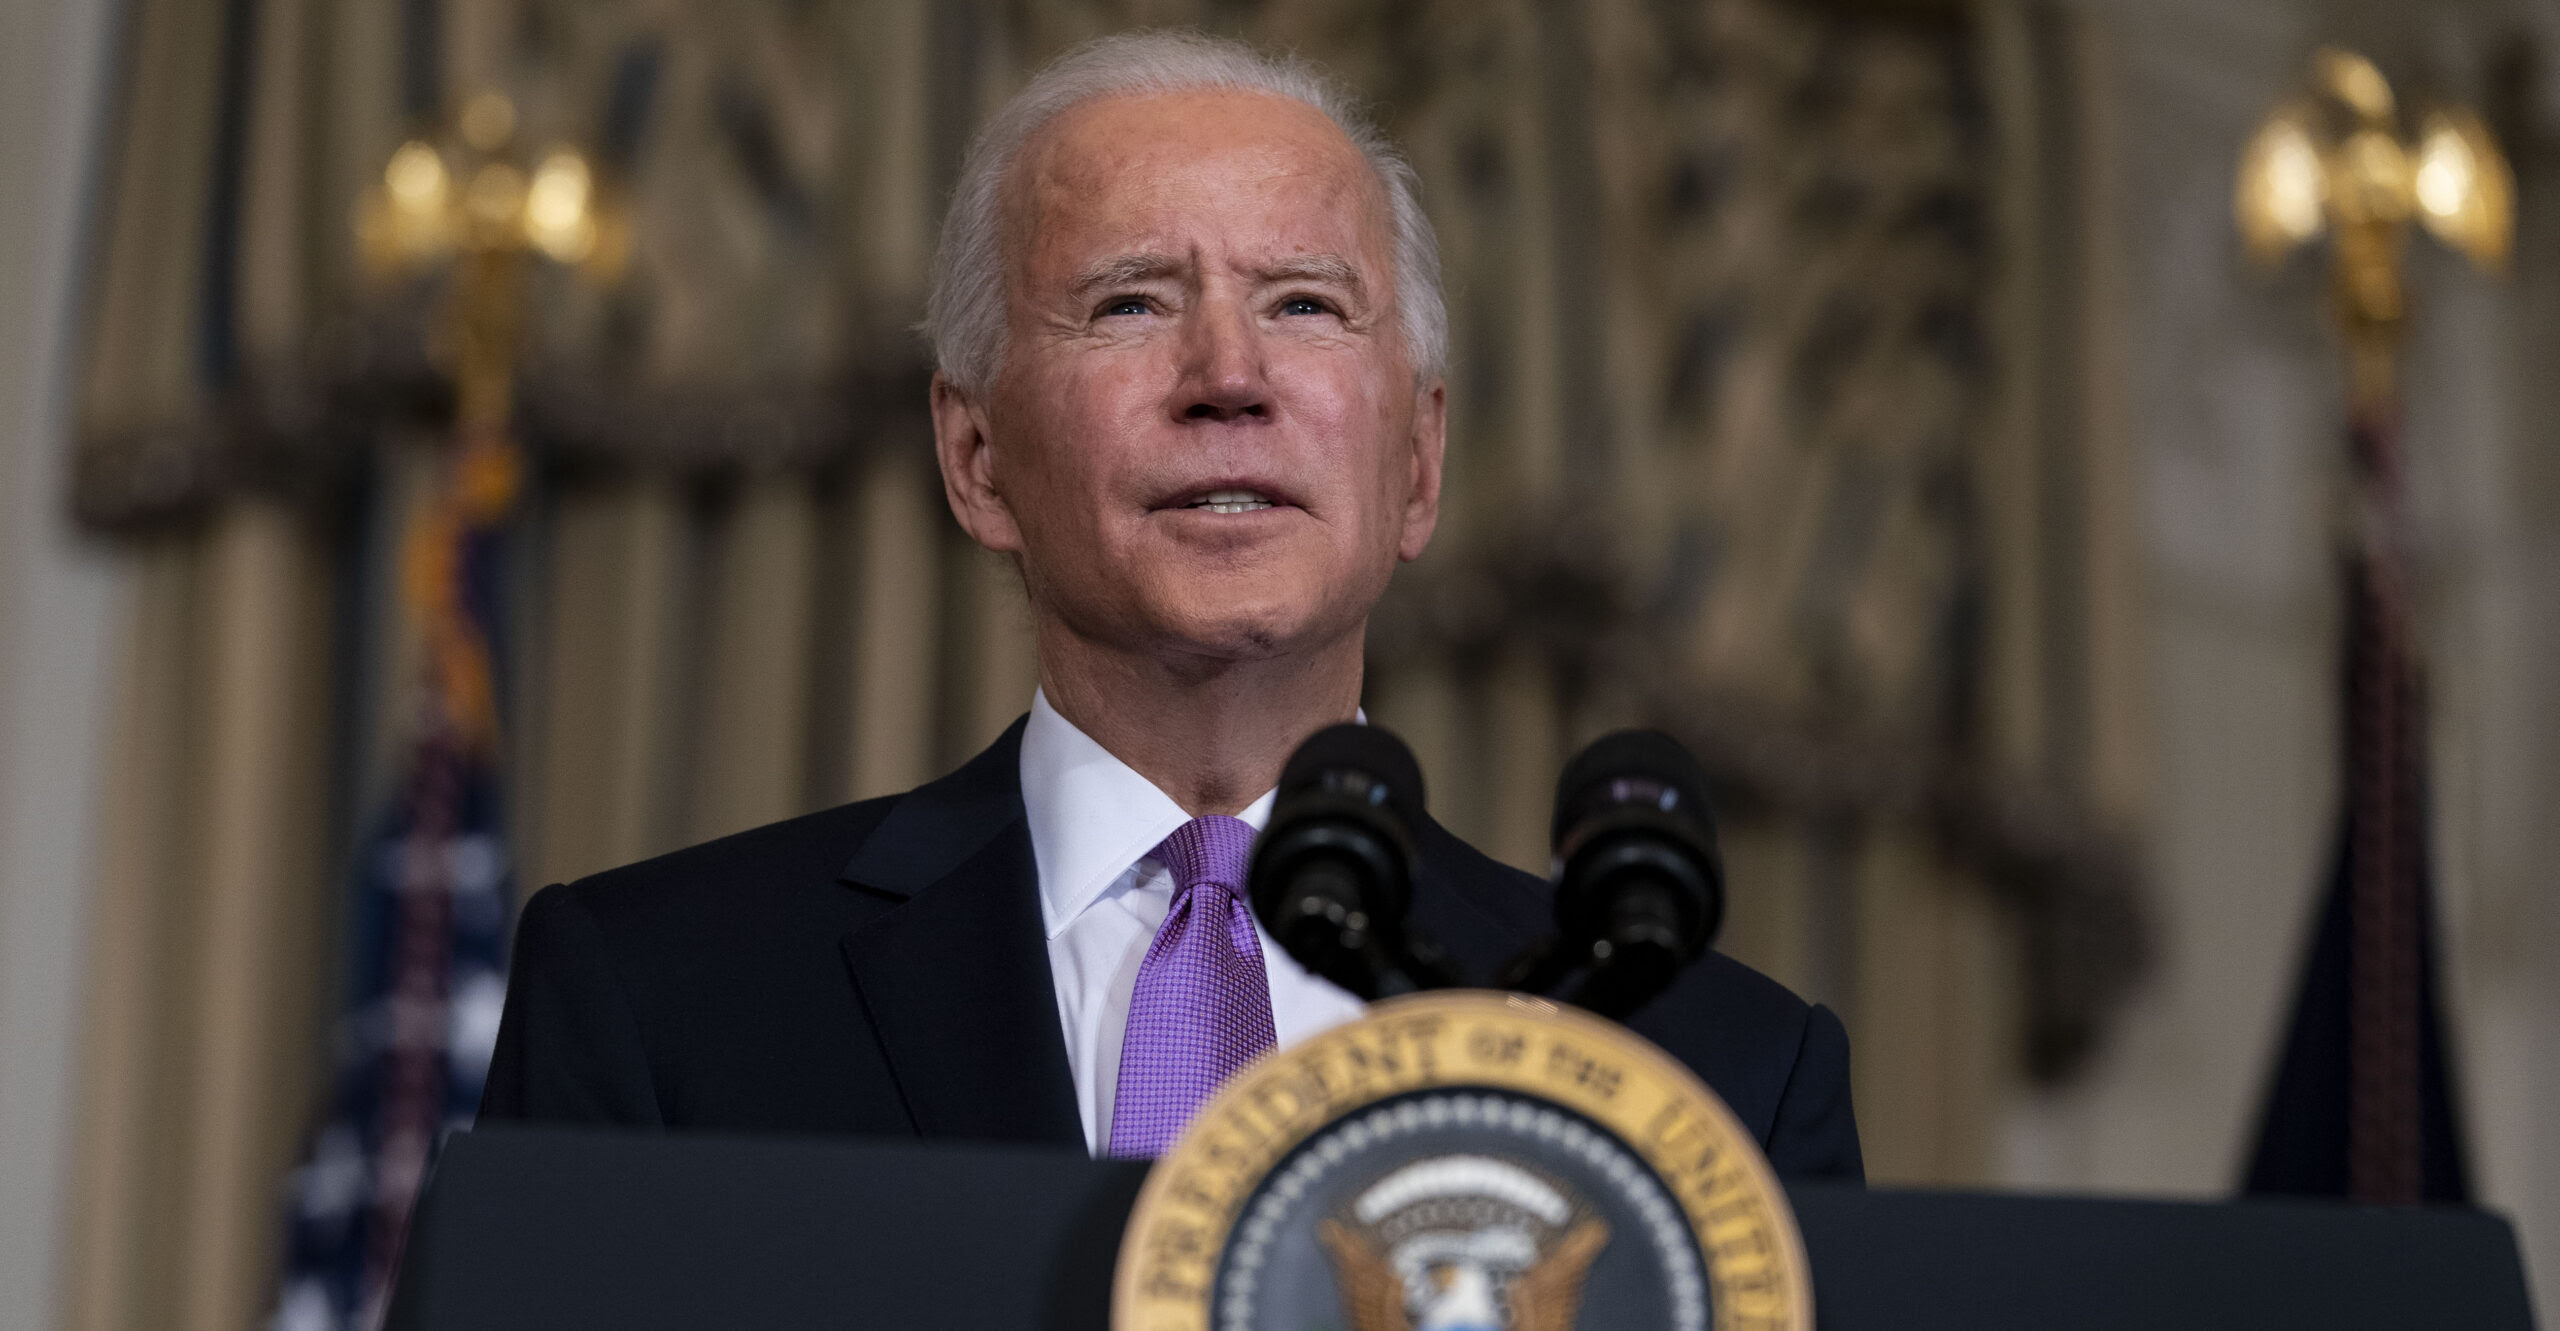 Biden Orders End to Private Prisons in Package to Achieve ‘Racial Equity’